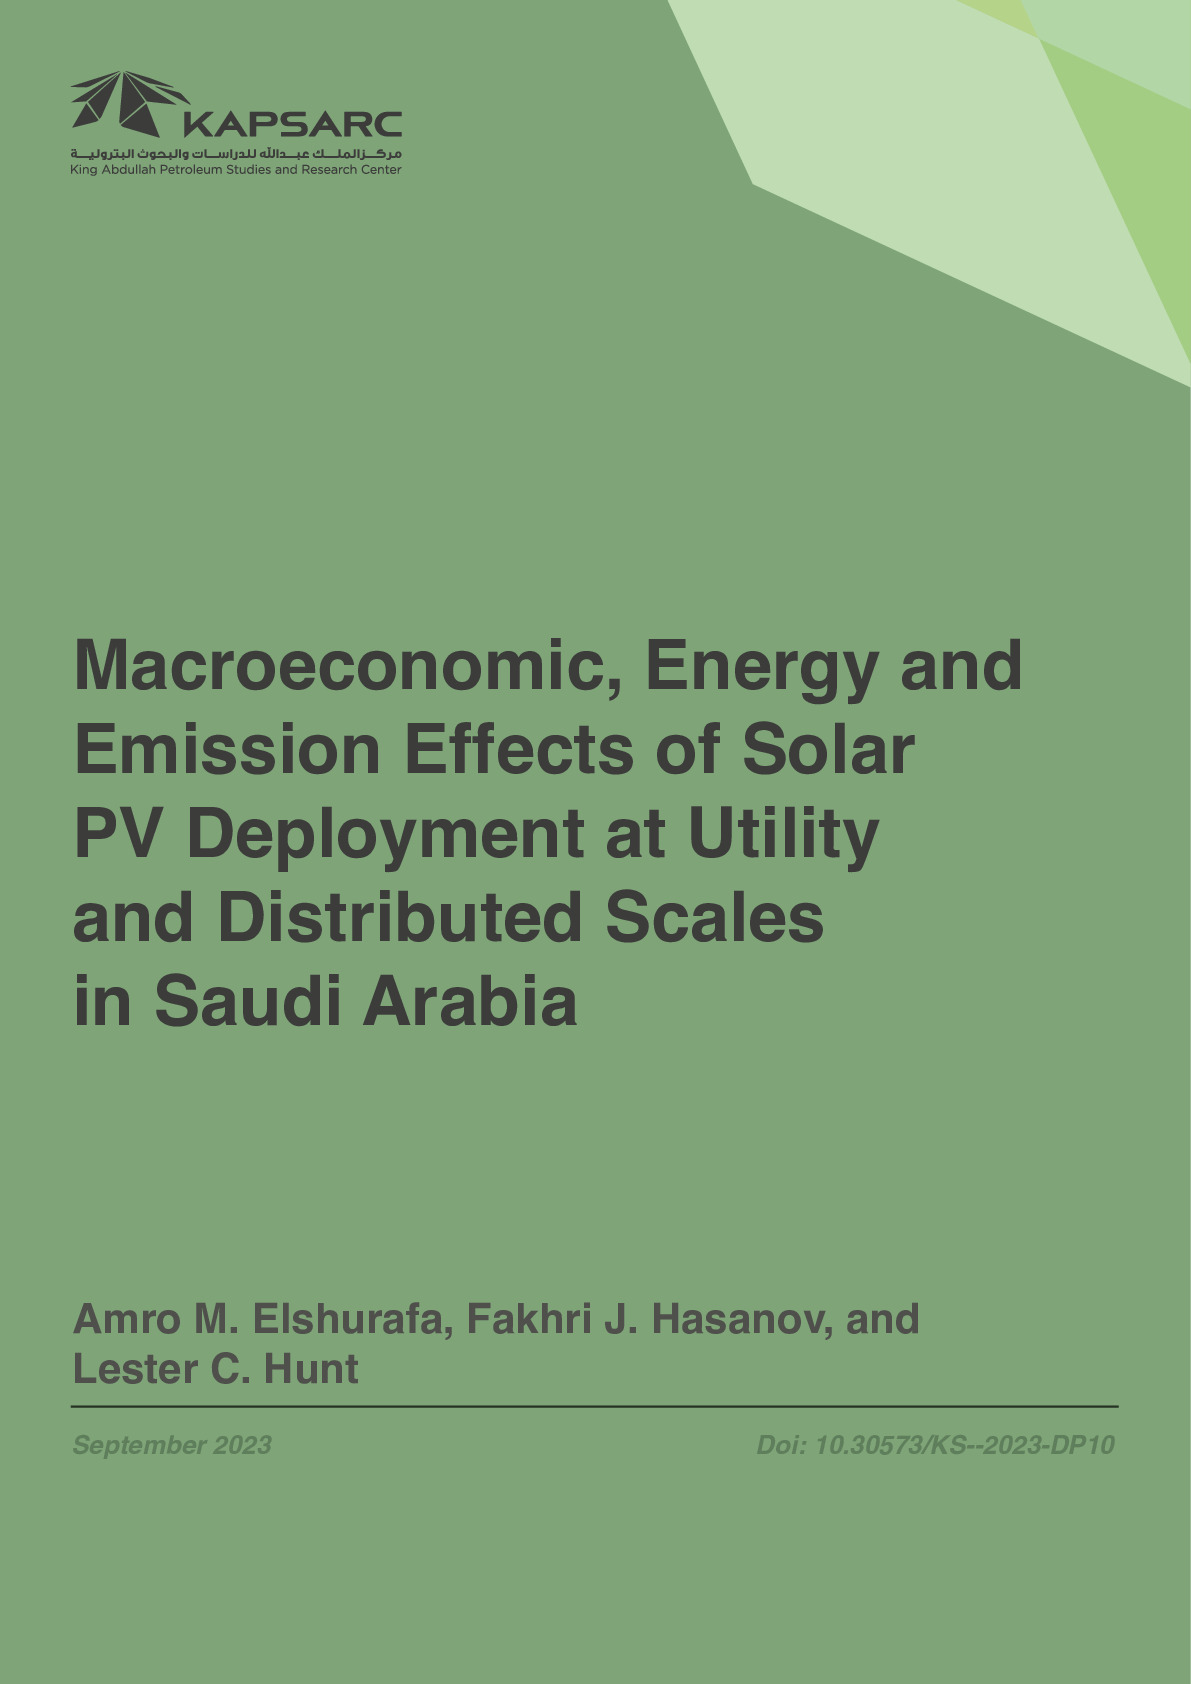 Macroeconomic, Energy and Emission Effects of Solar PV Deployment at Utility and Distributed Scales in Saudi Arabia